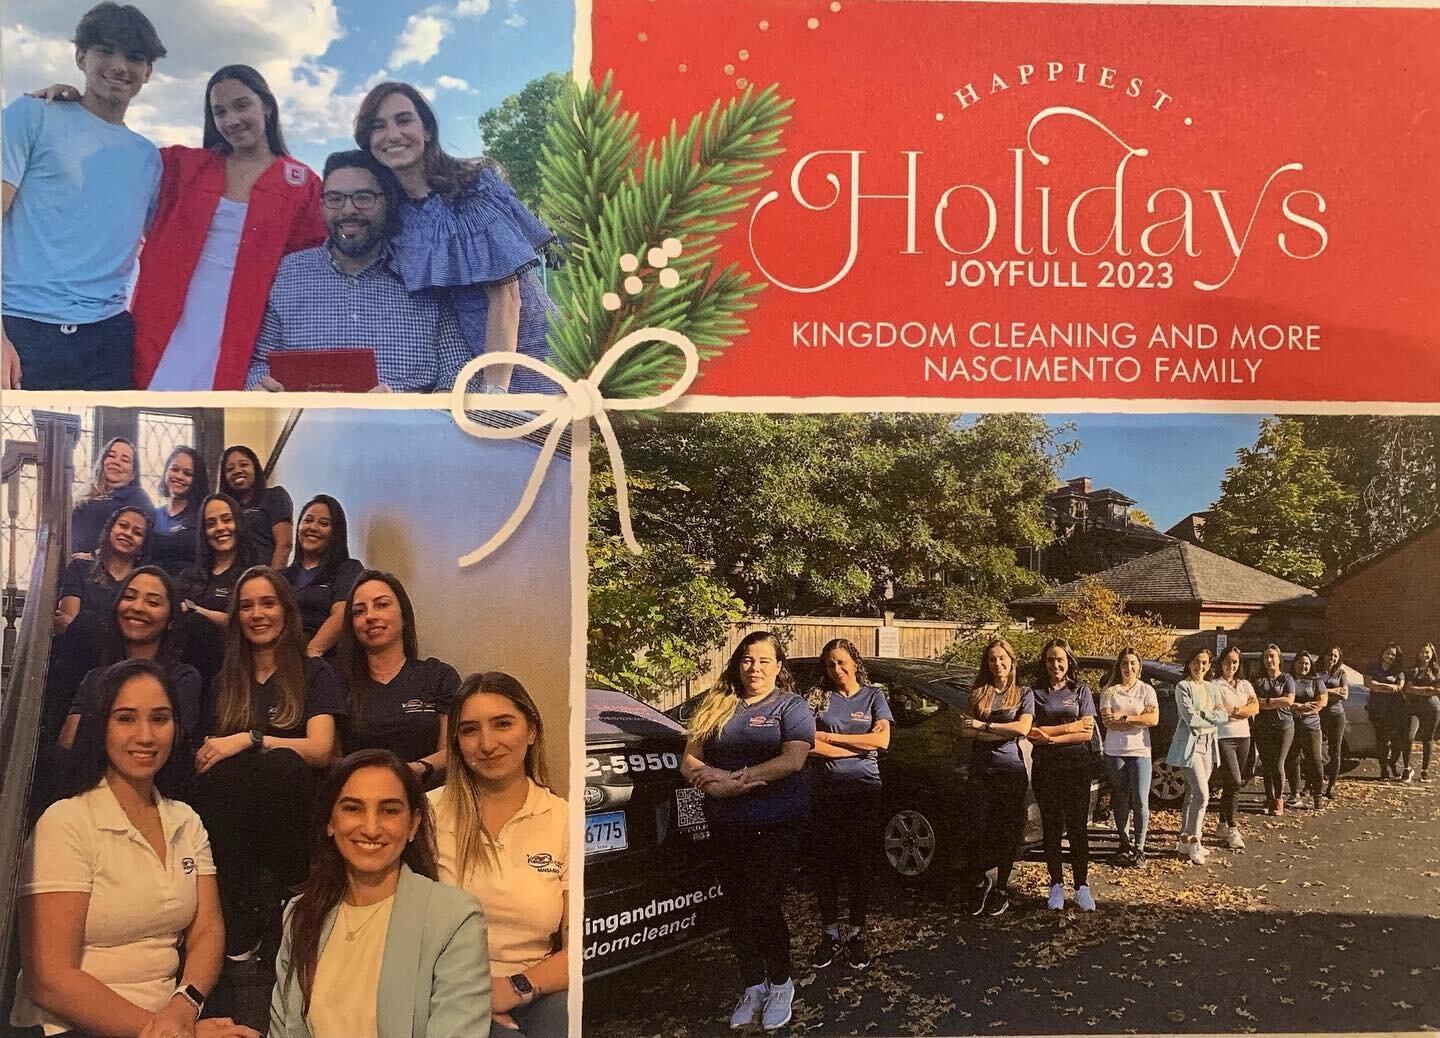 Merry Christmas From Kingdom Cleaning Team!
HAPPY HOLIDAYS 🎄🎁🎄🎁
#westhartford #housecleaning #cleaningservices #connecticut  #massachusetts